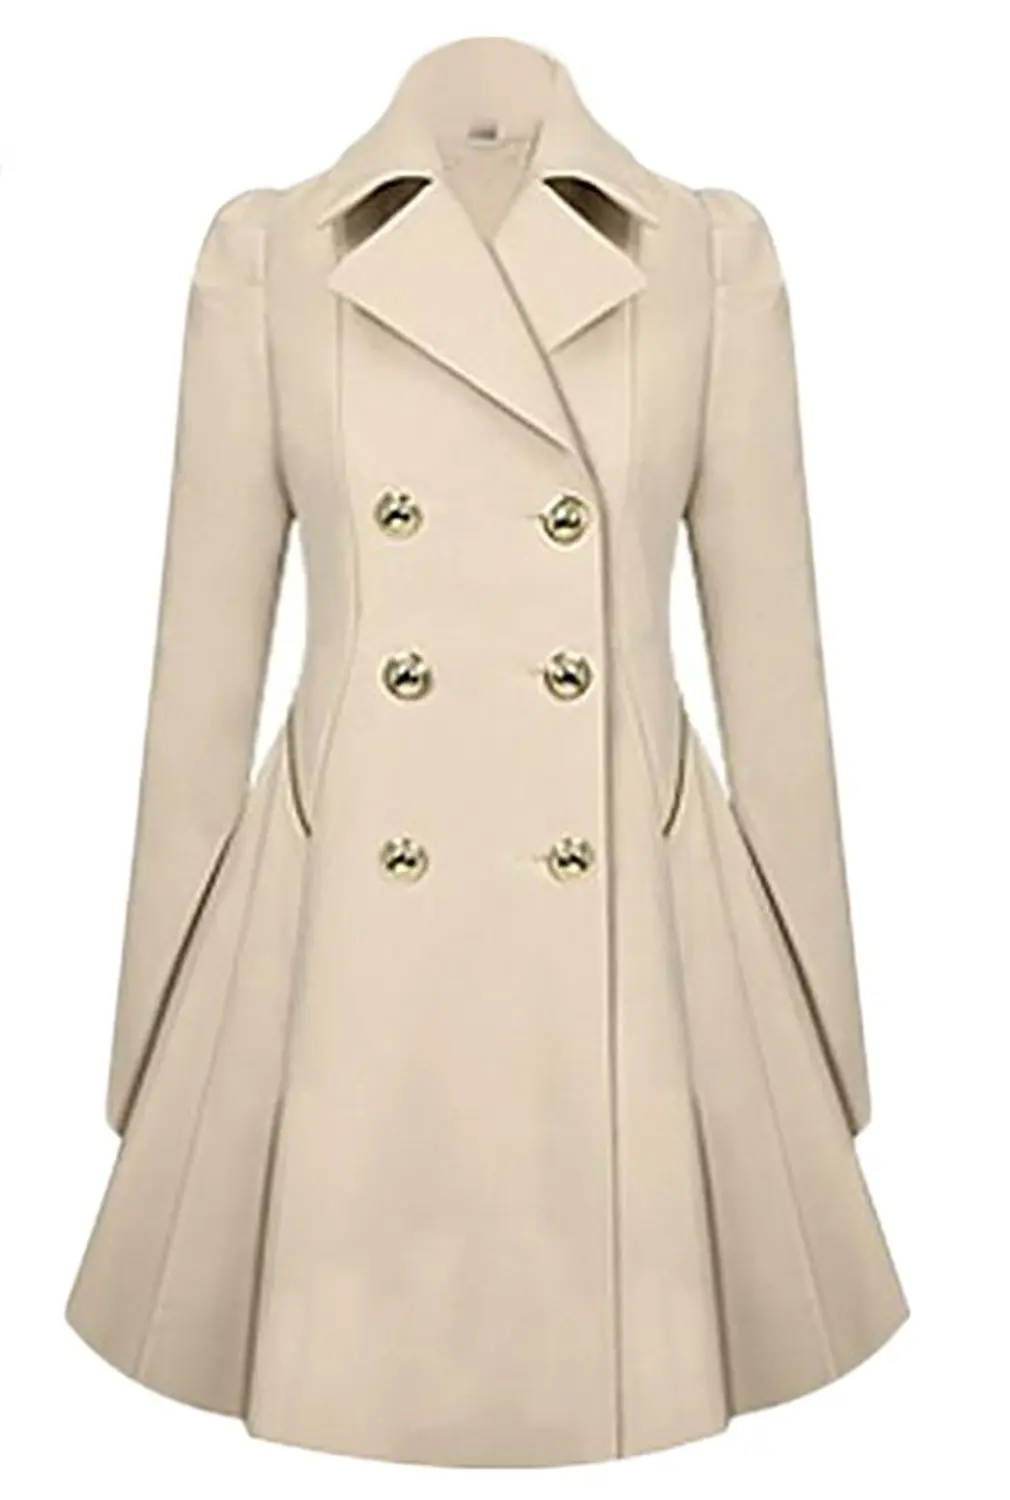 Women's Classic Double Breasted Flare Slim Trench Coat -in Trench from ...